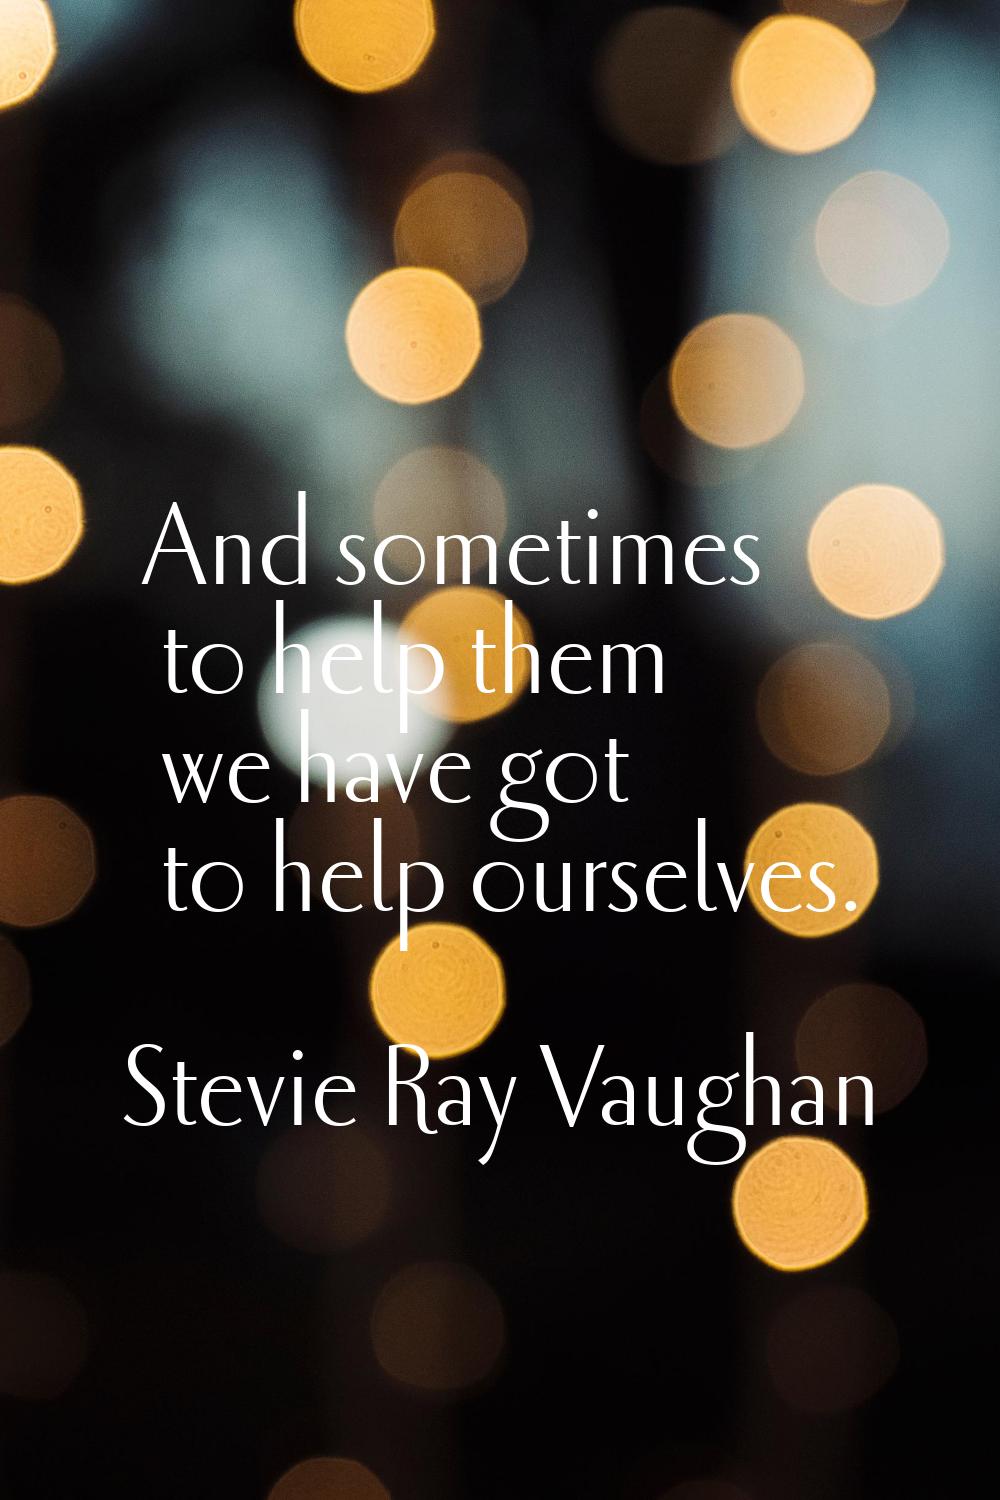 And sometimes to help them we have got to help ourselves.